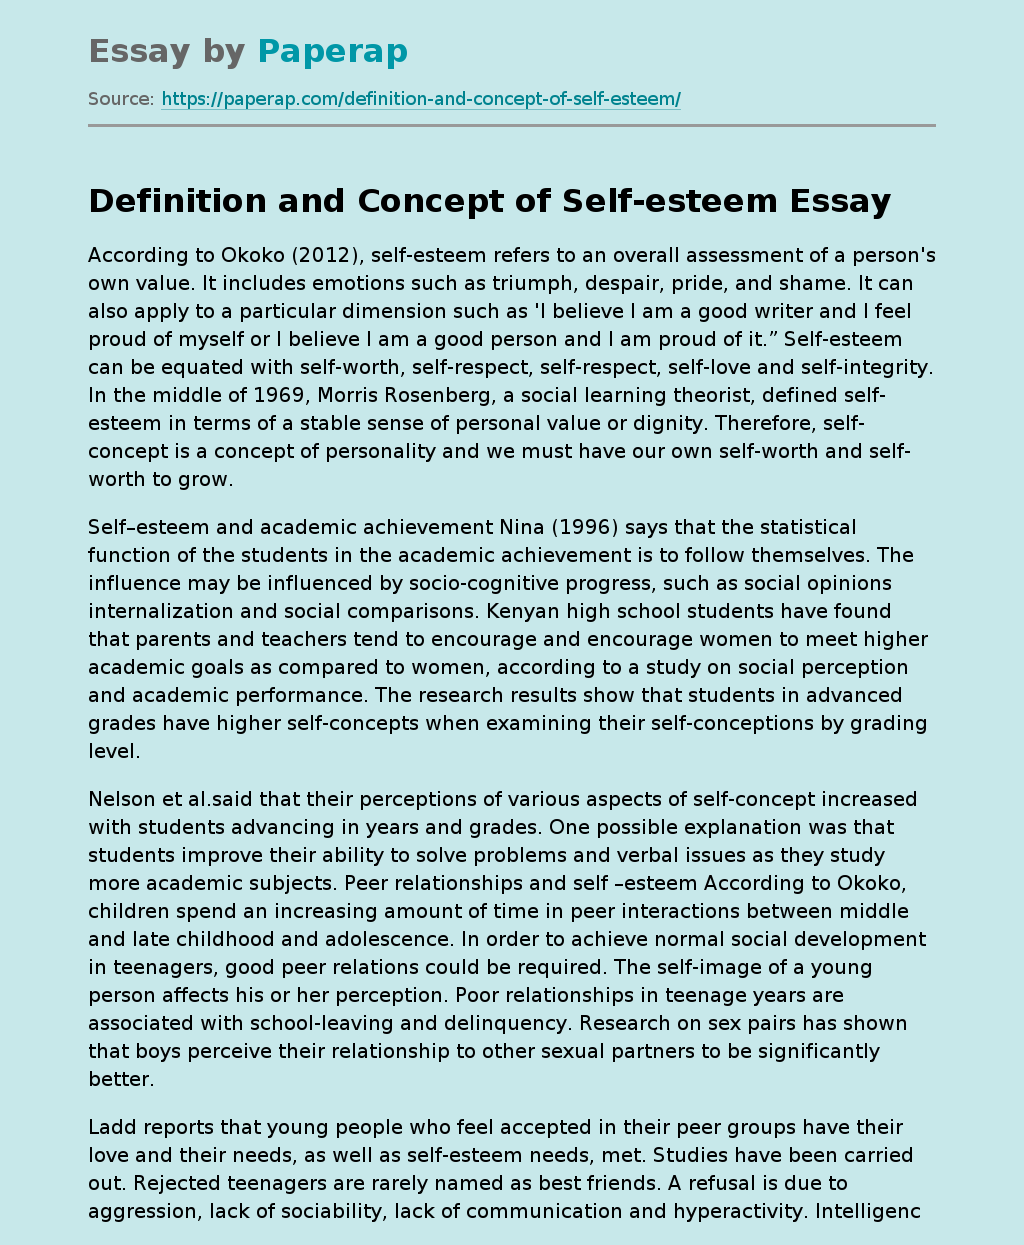 Definition and Concept of Self-esteem